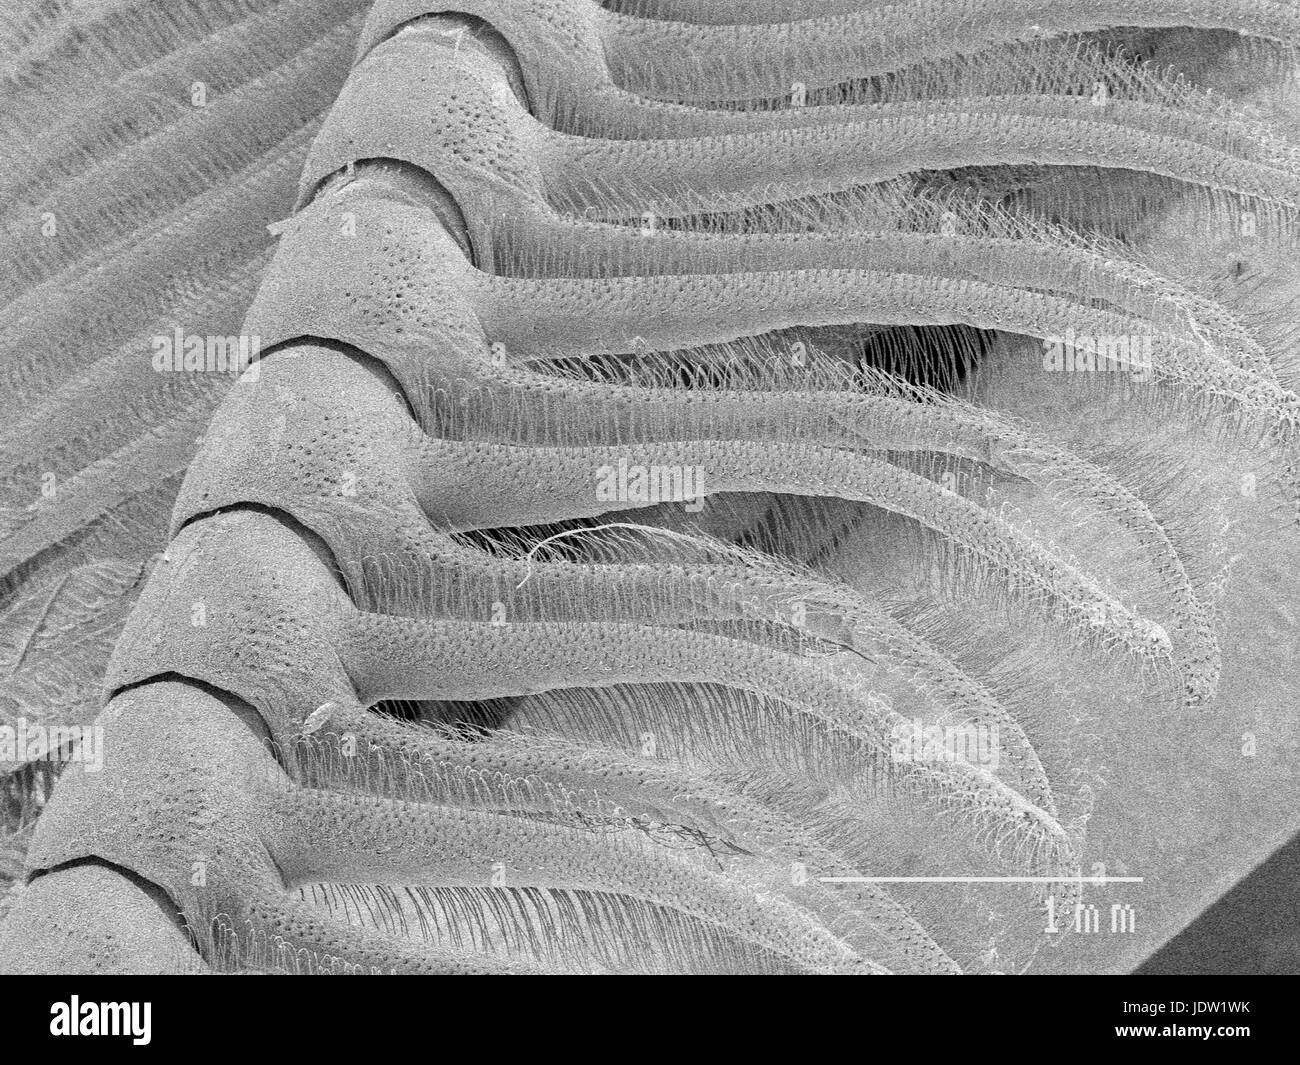 Magnified view of moth antenna Stock Photo